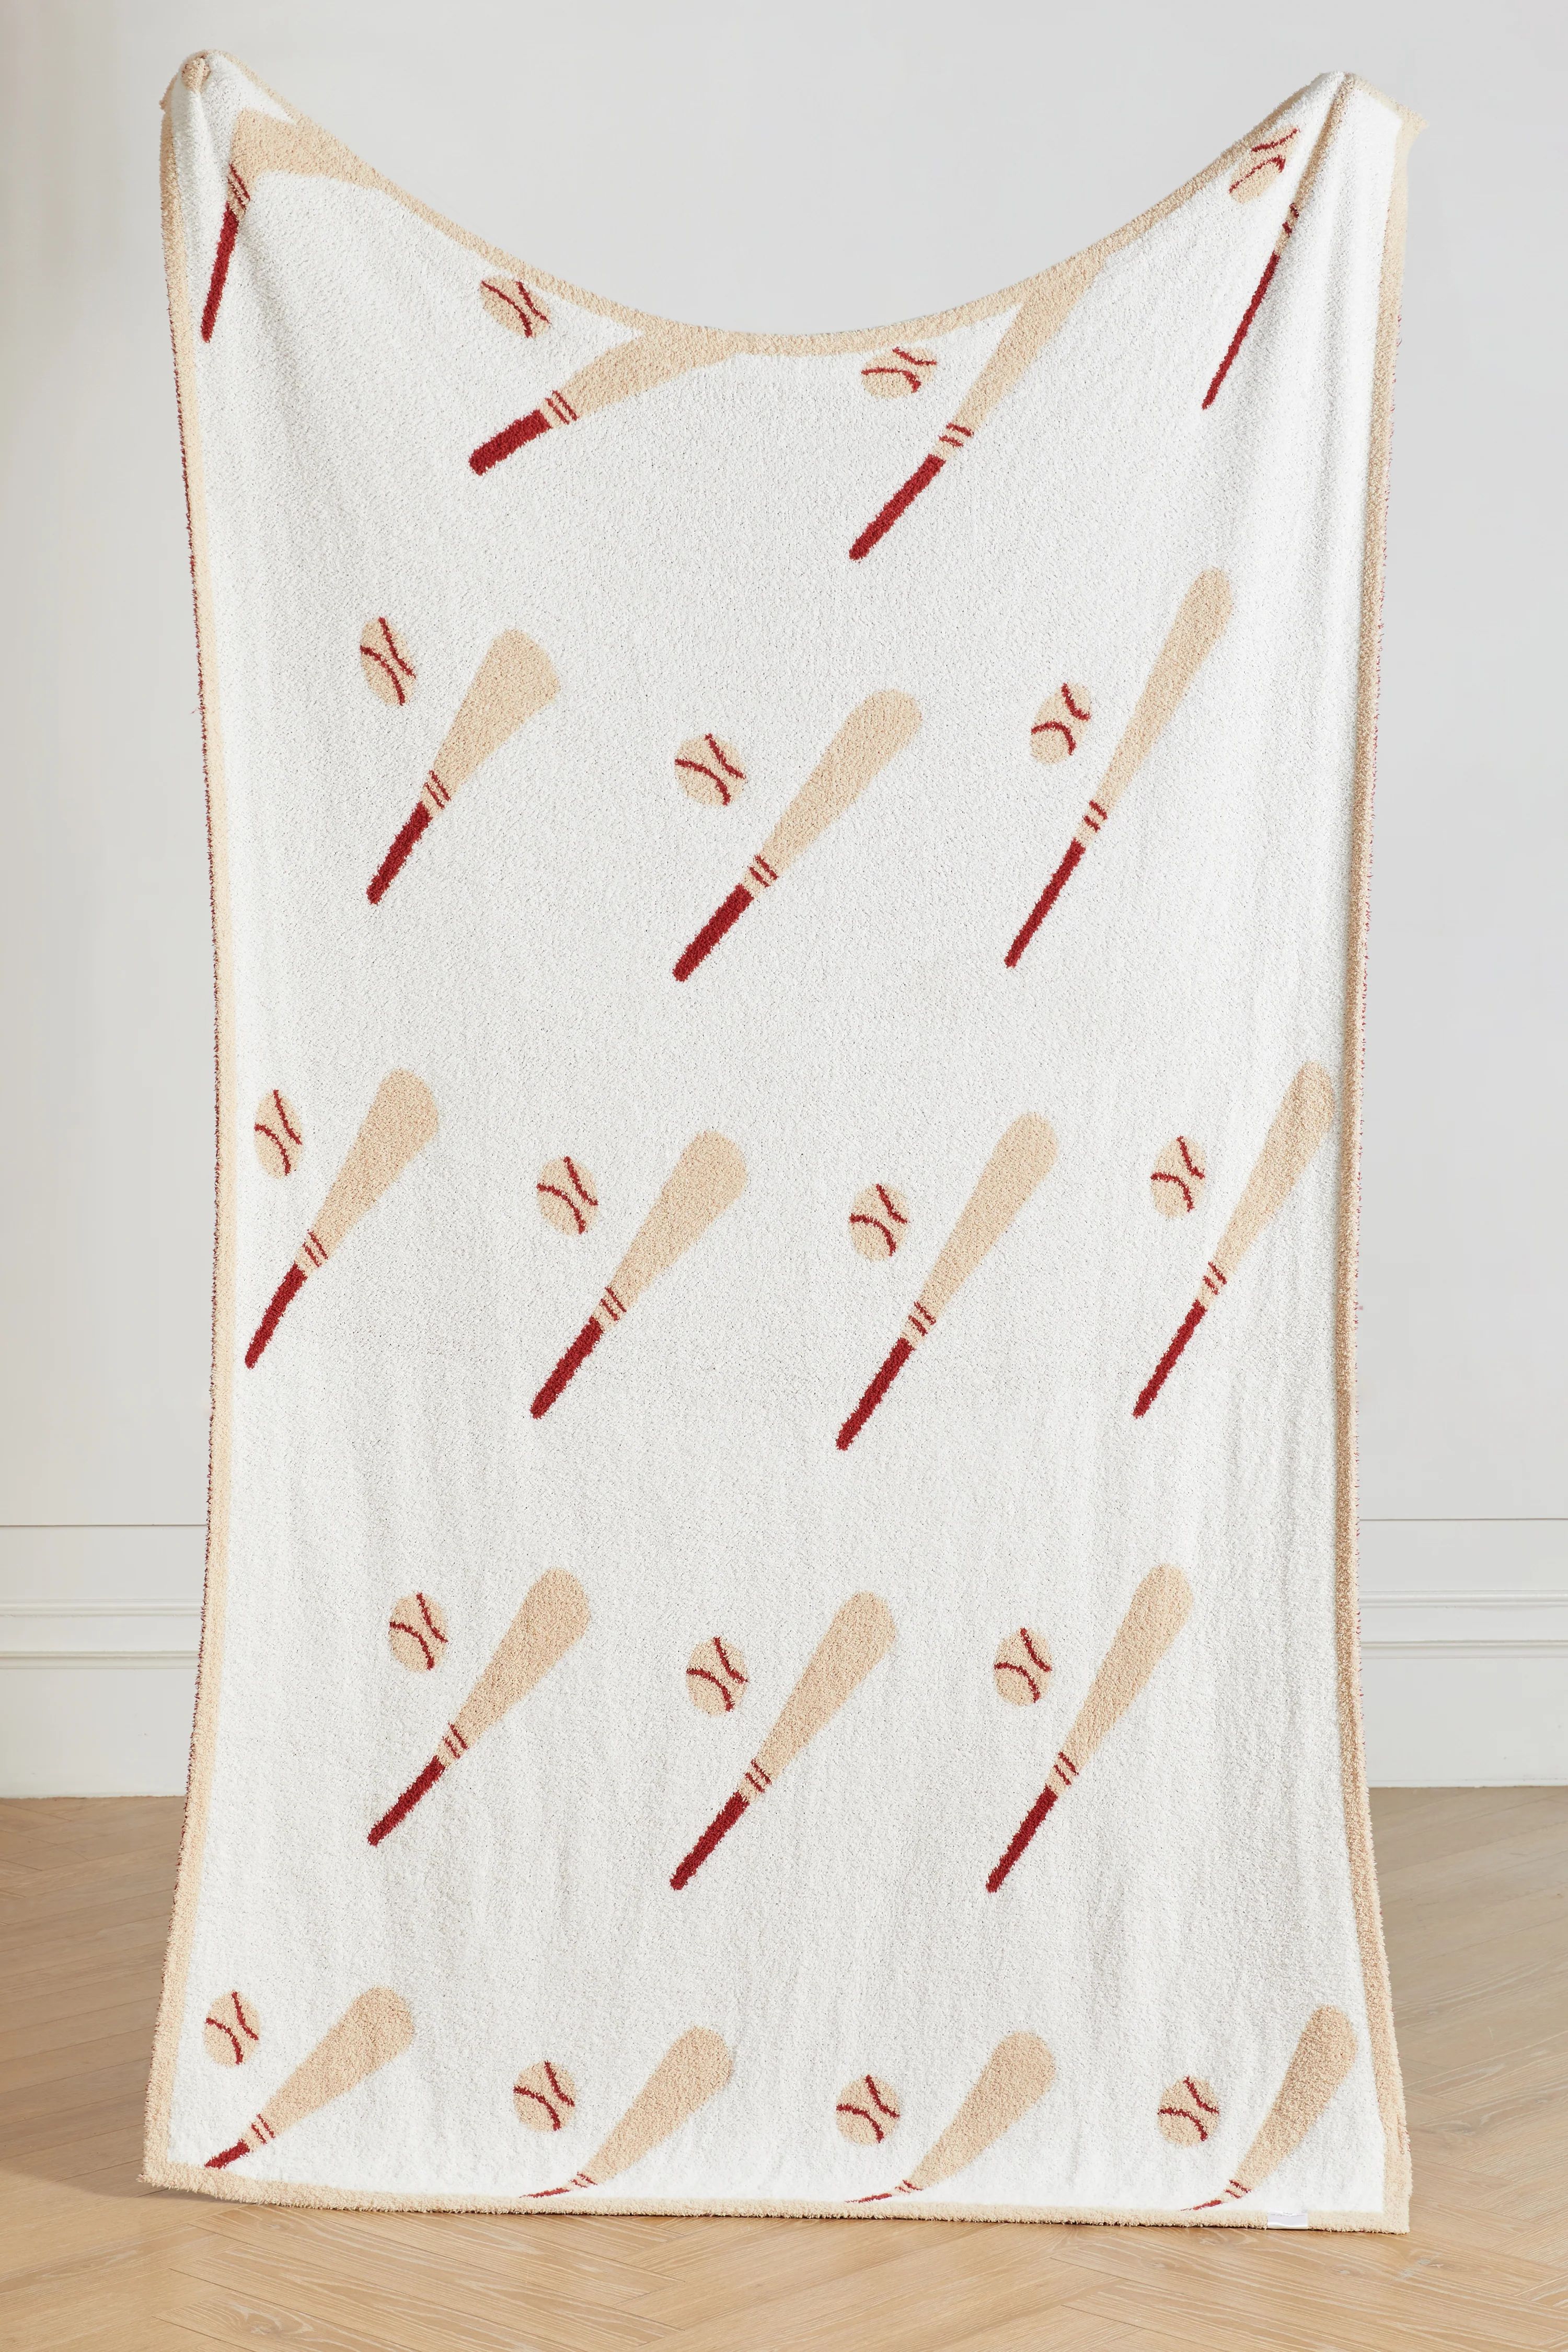 Baseball Buttery Blanket- Pre Order May 31st | The Styled Collection